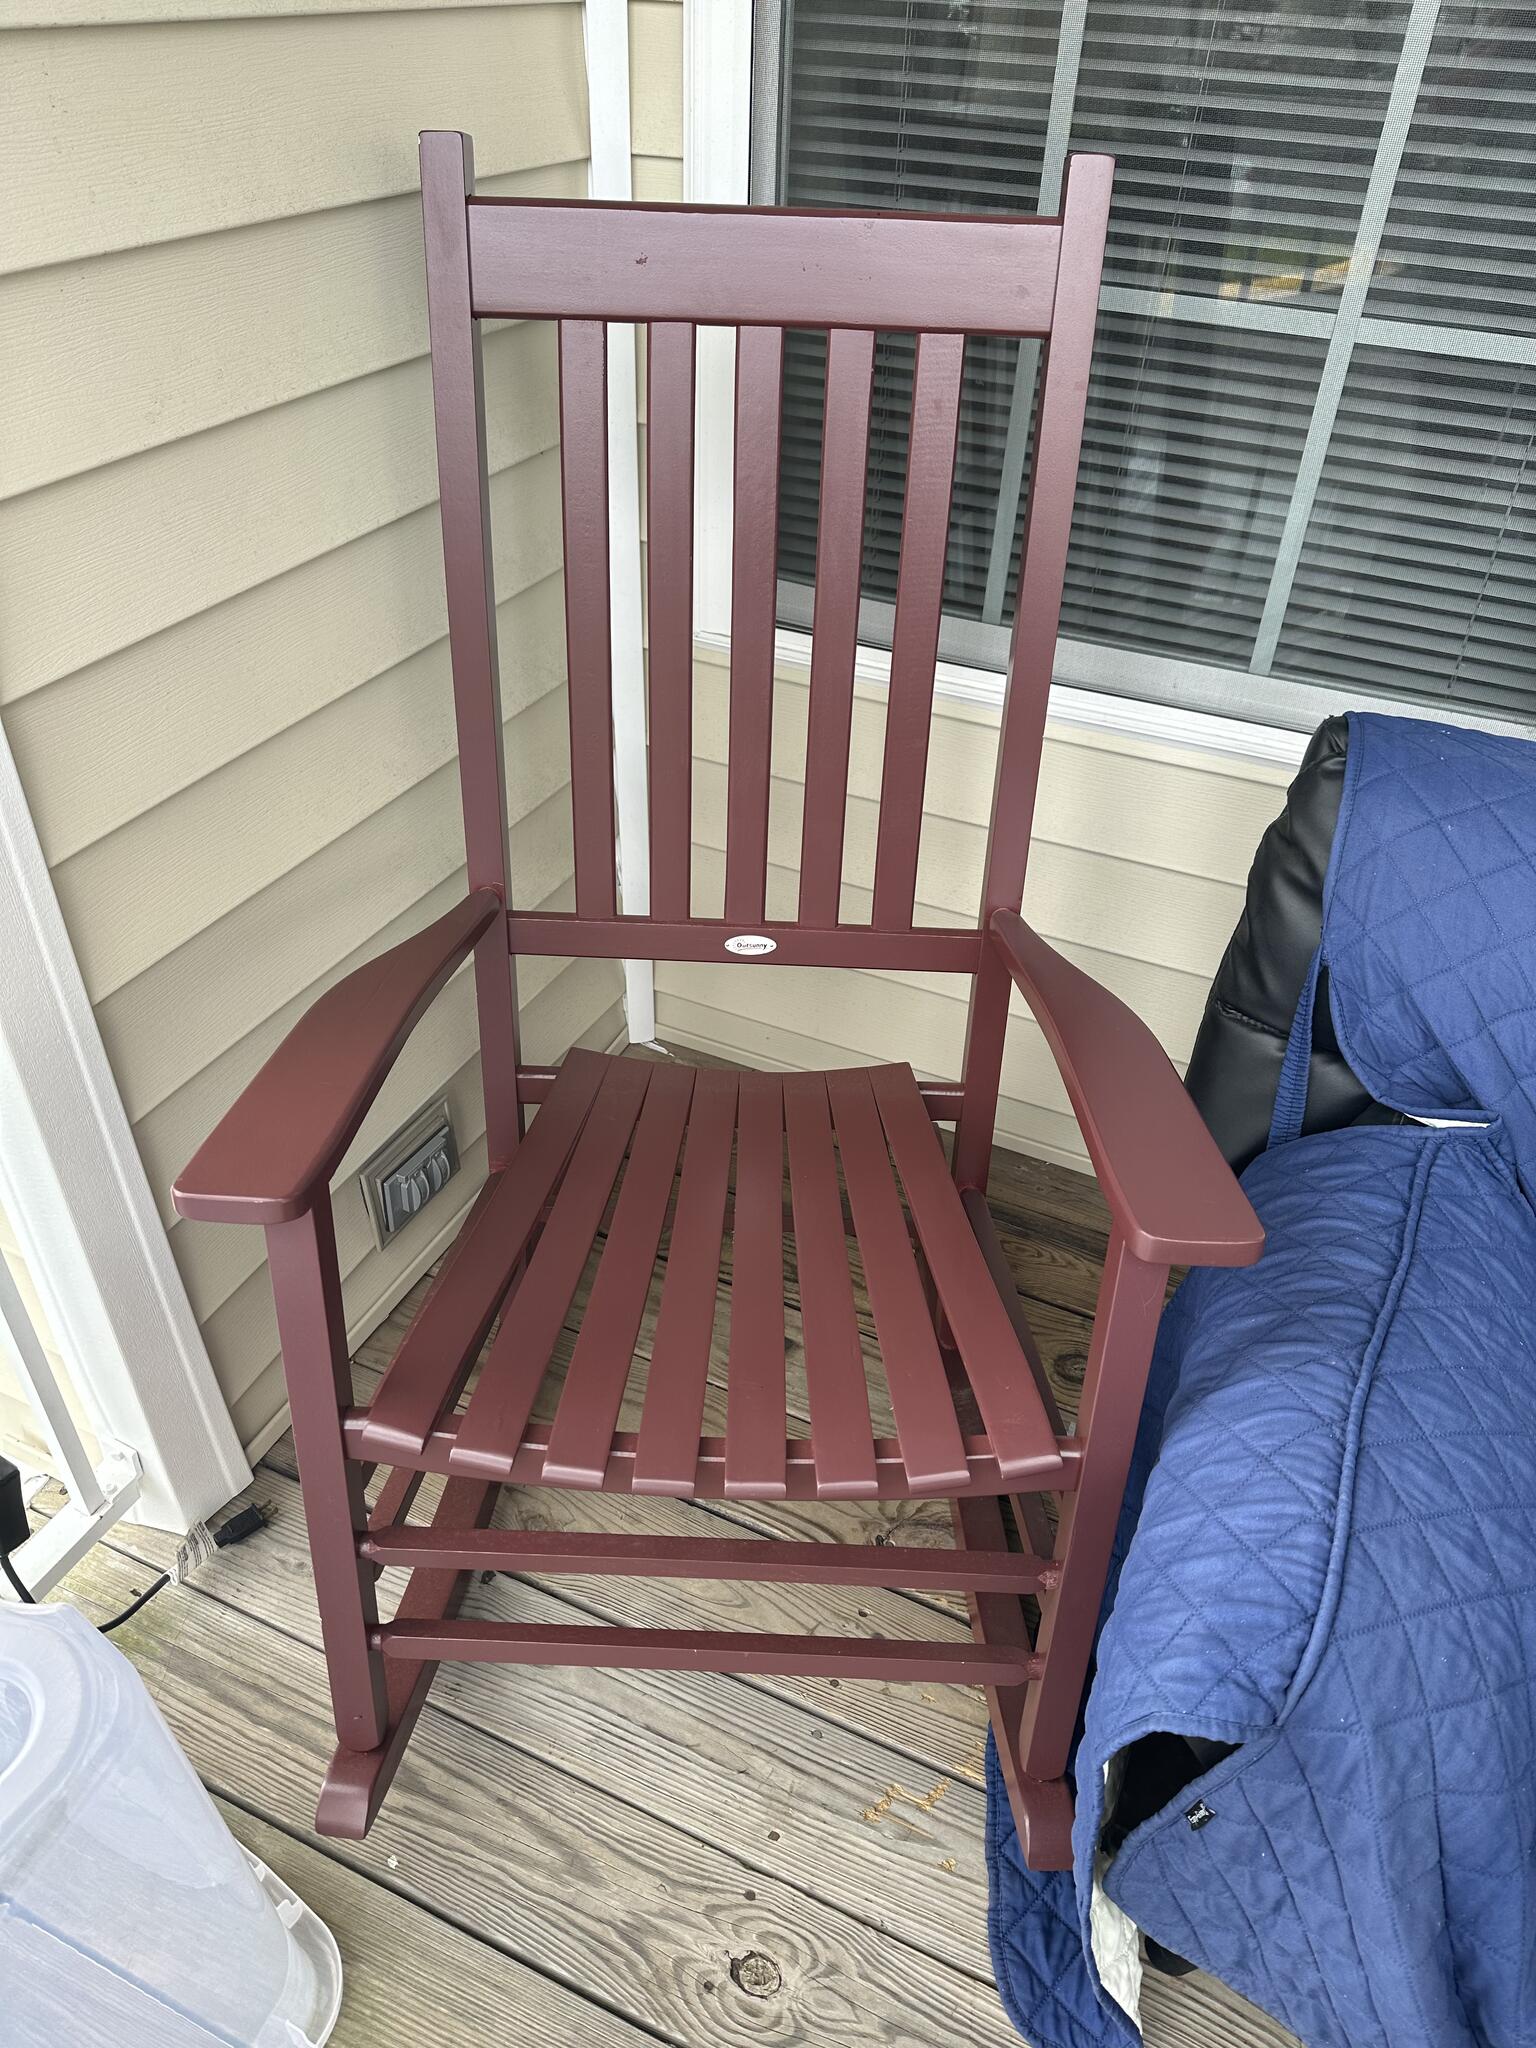 Rocking Chair For $100 In Centreville, VA For Sale and Free — Nextdoor